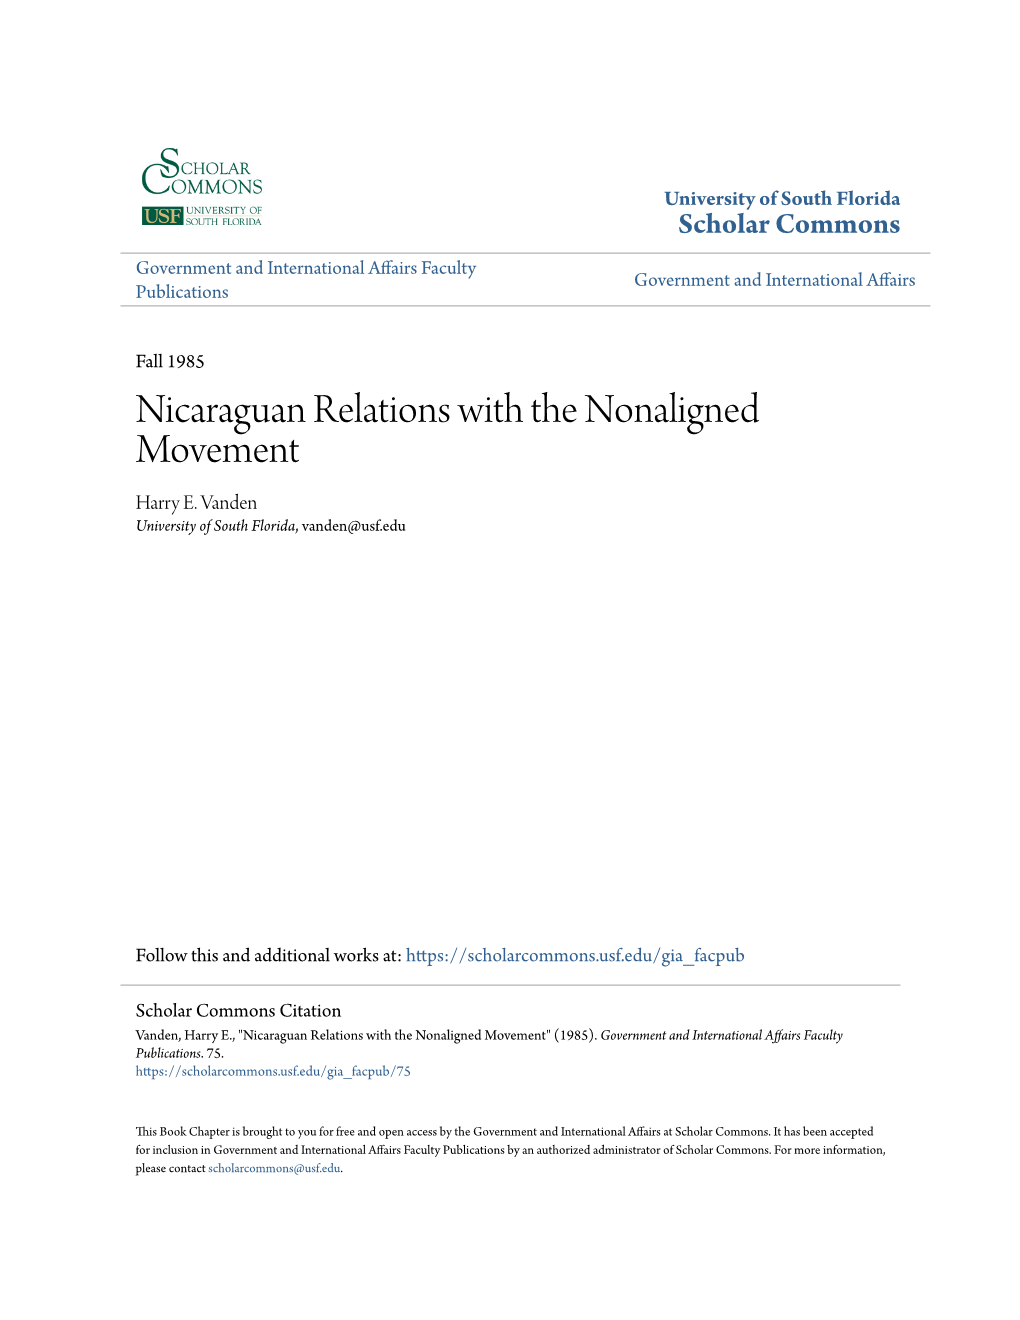 Nicaraguan Relations with the Nonaligned Movement Harry E